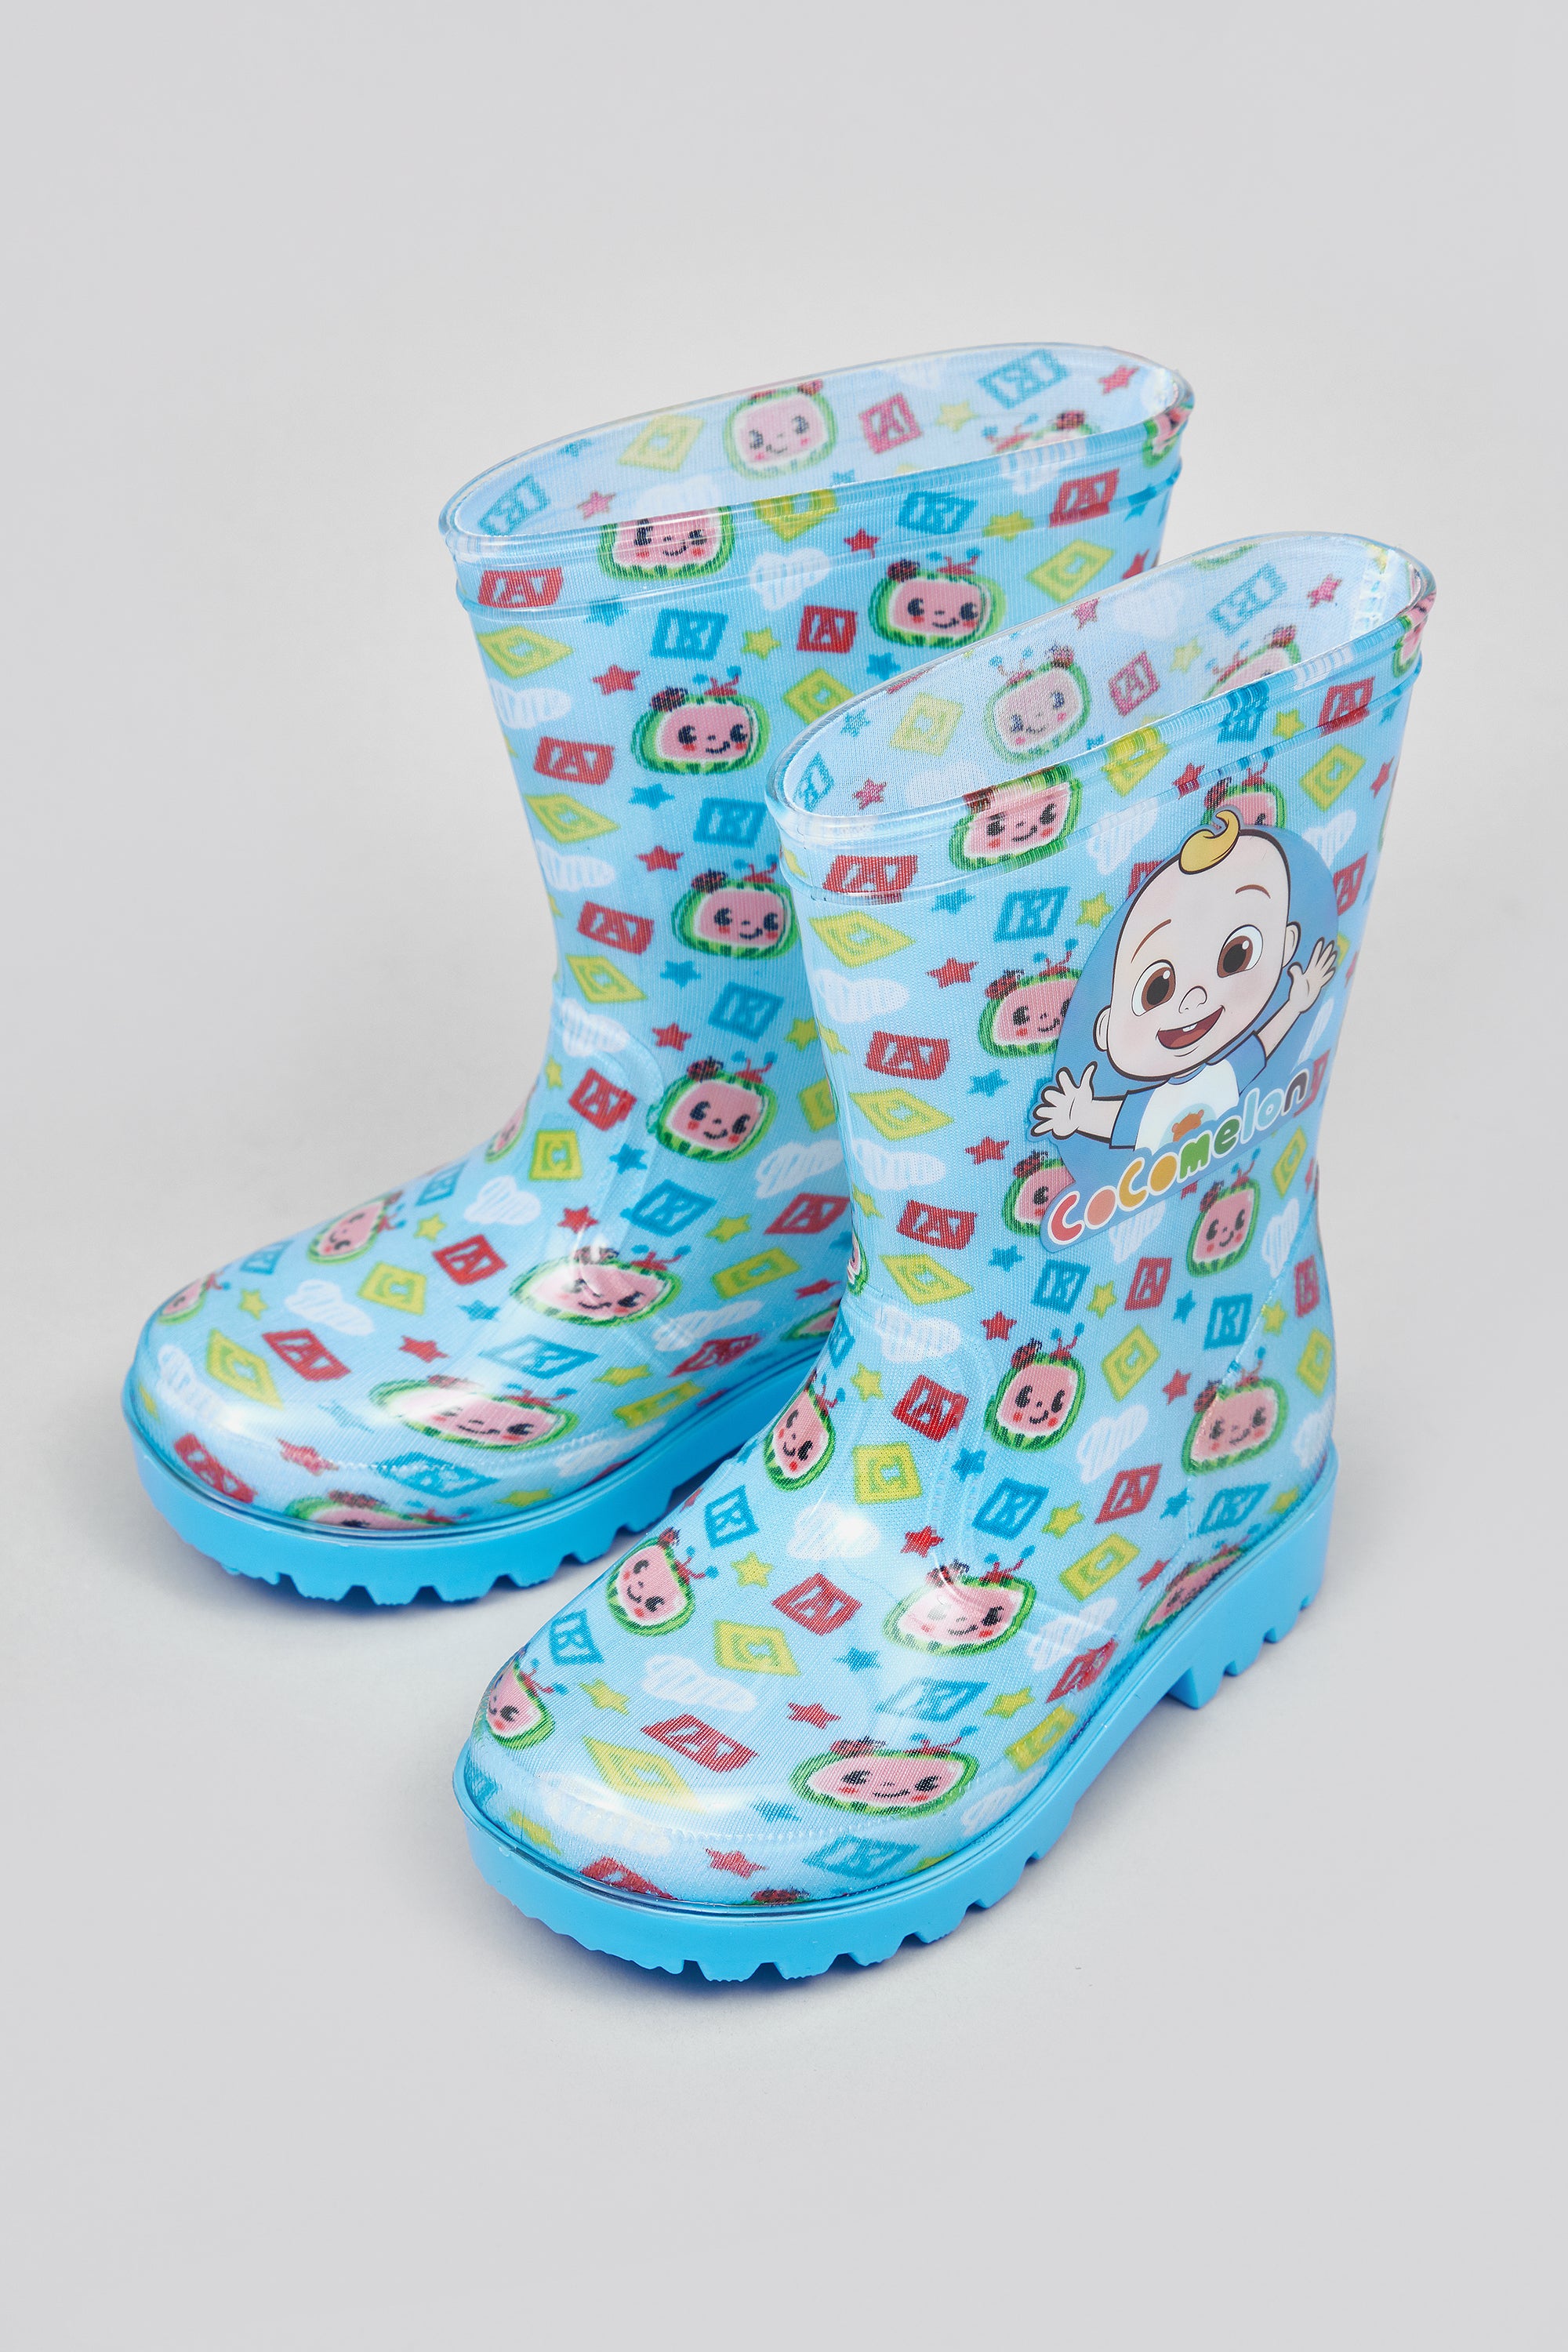 COCOMELON PLAYTIME BLOCKS PVC WELLY